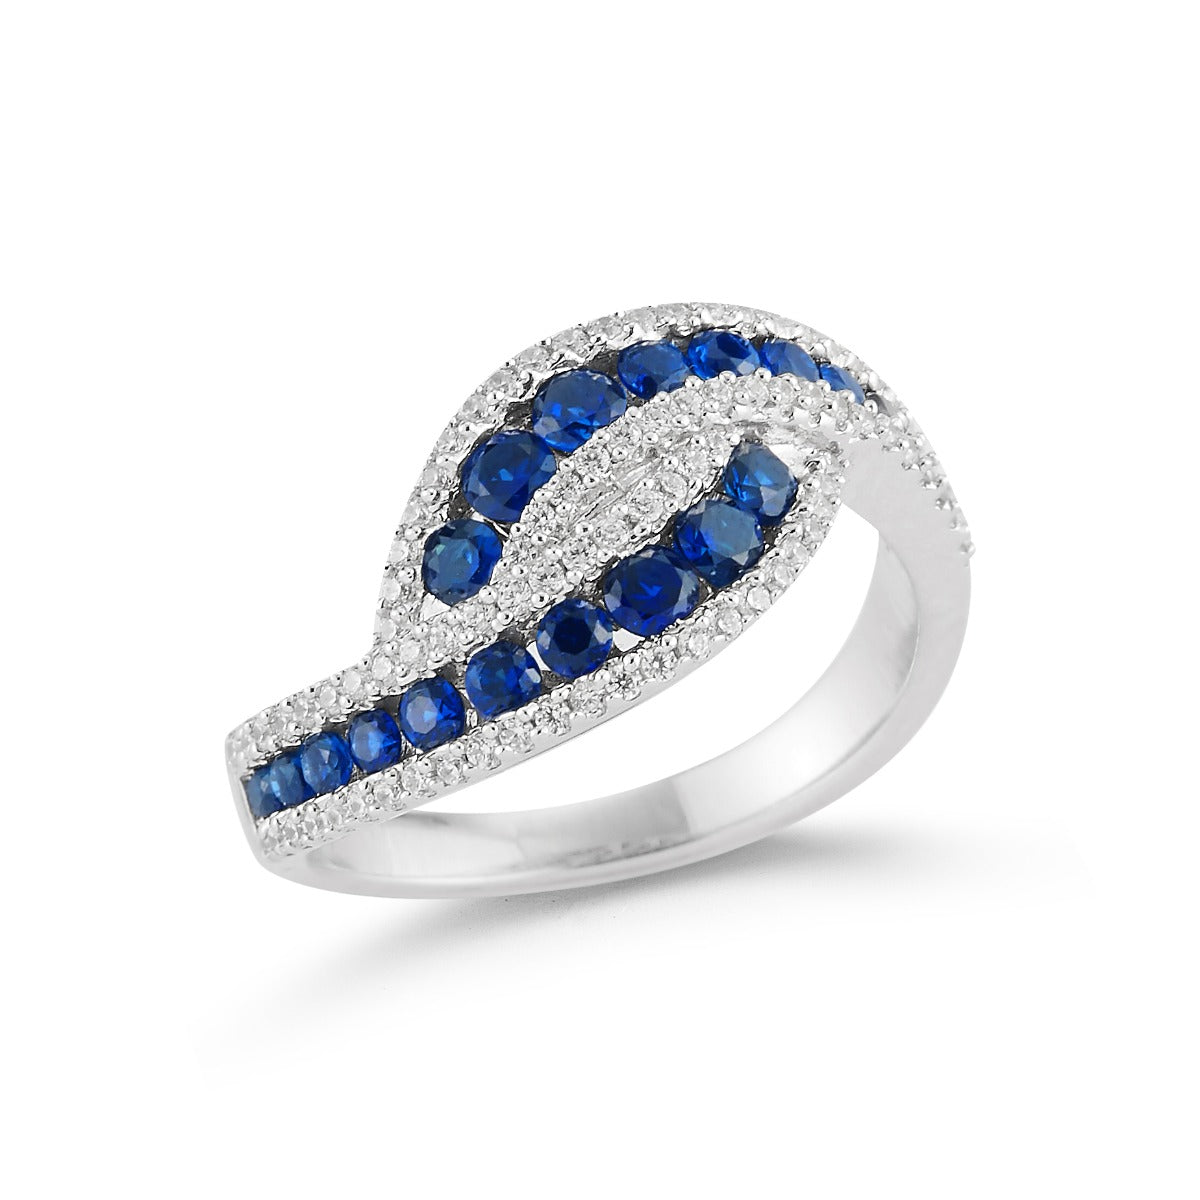 14kw  gold ring with  1ct  T.W in Sapphires  and 0.37ct T.W in diamonds.